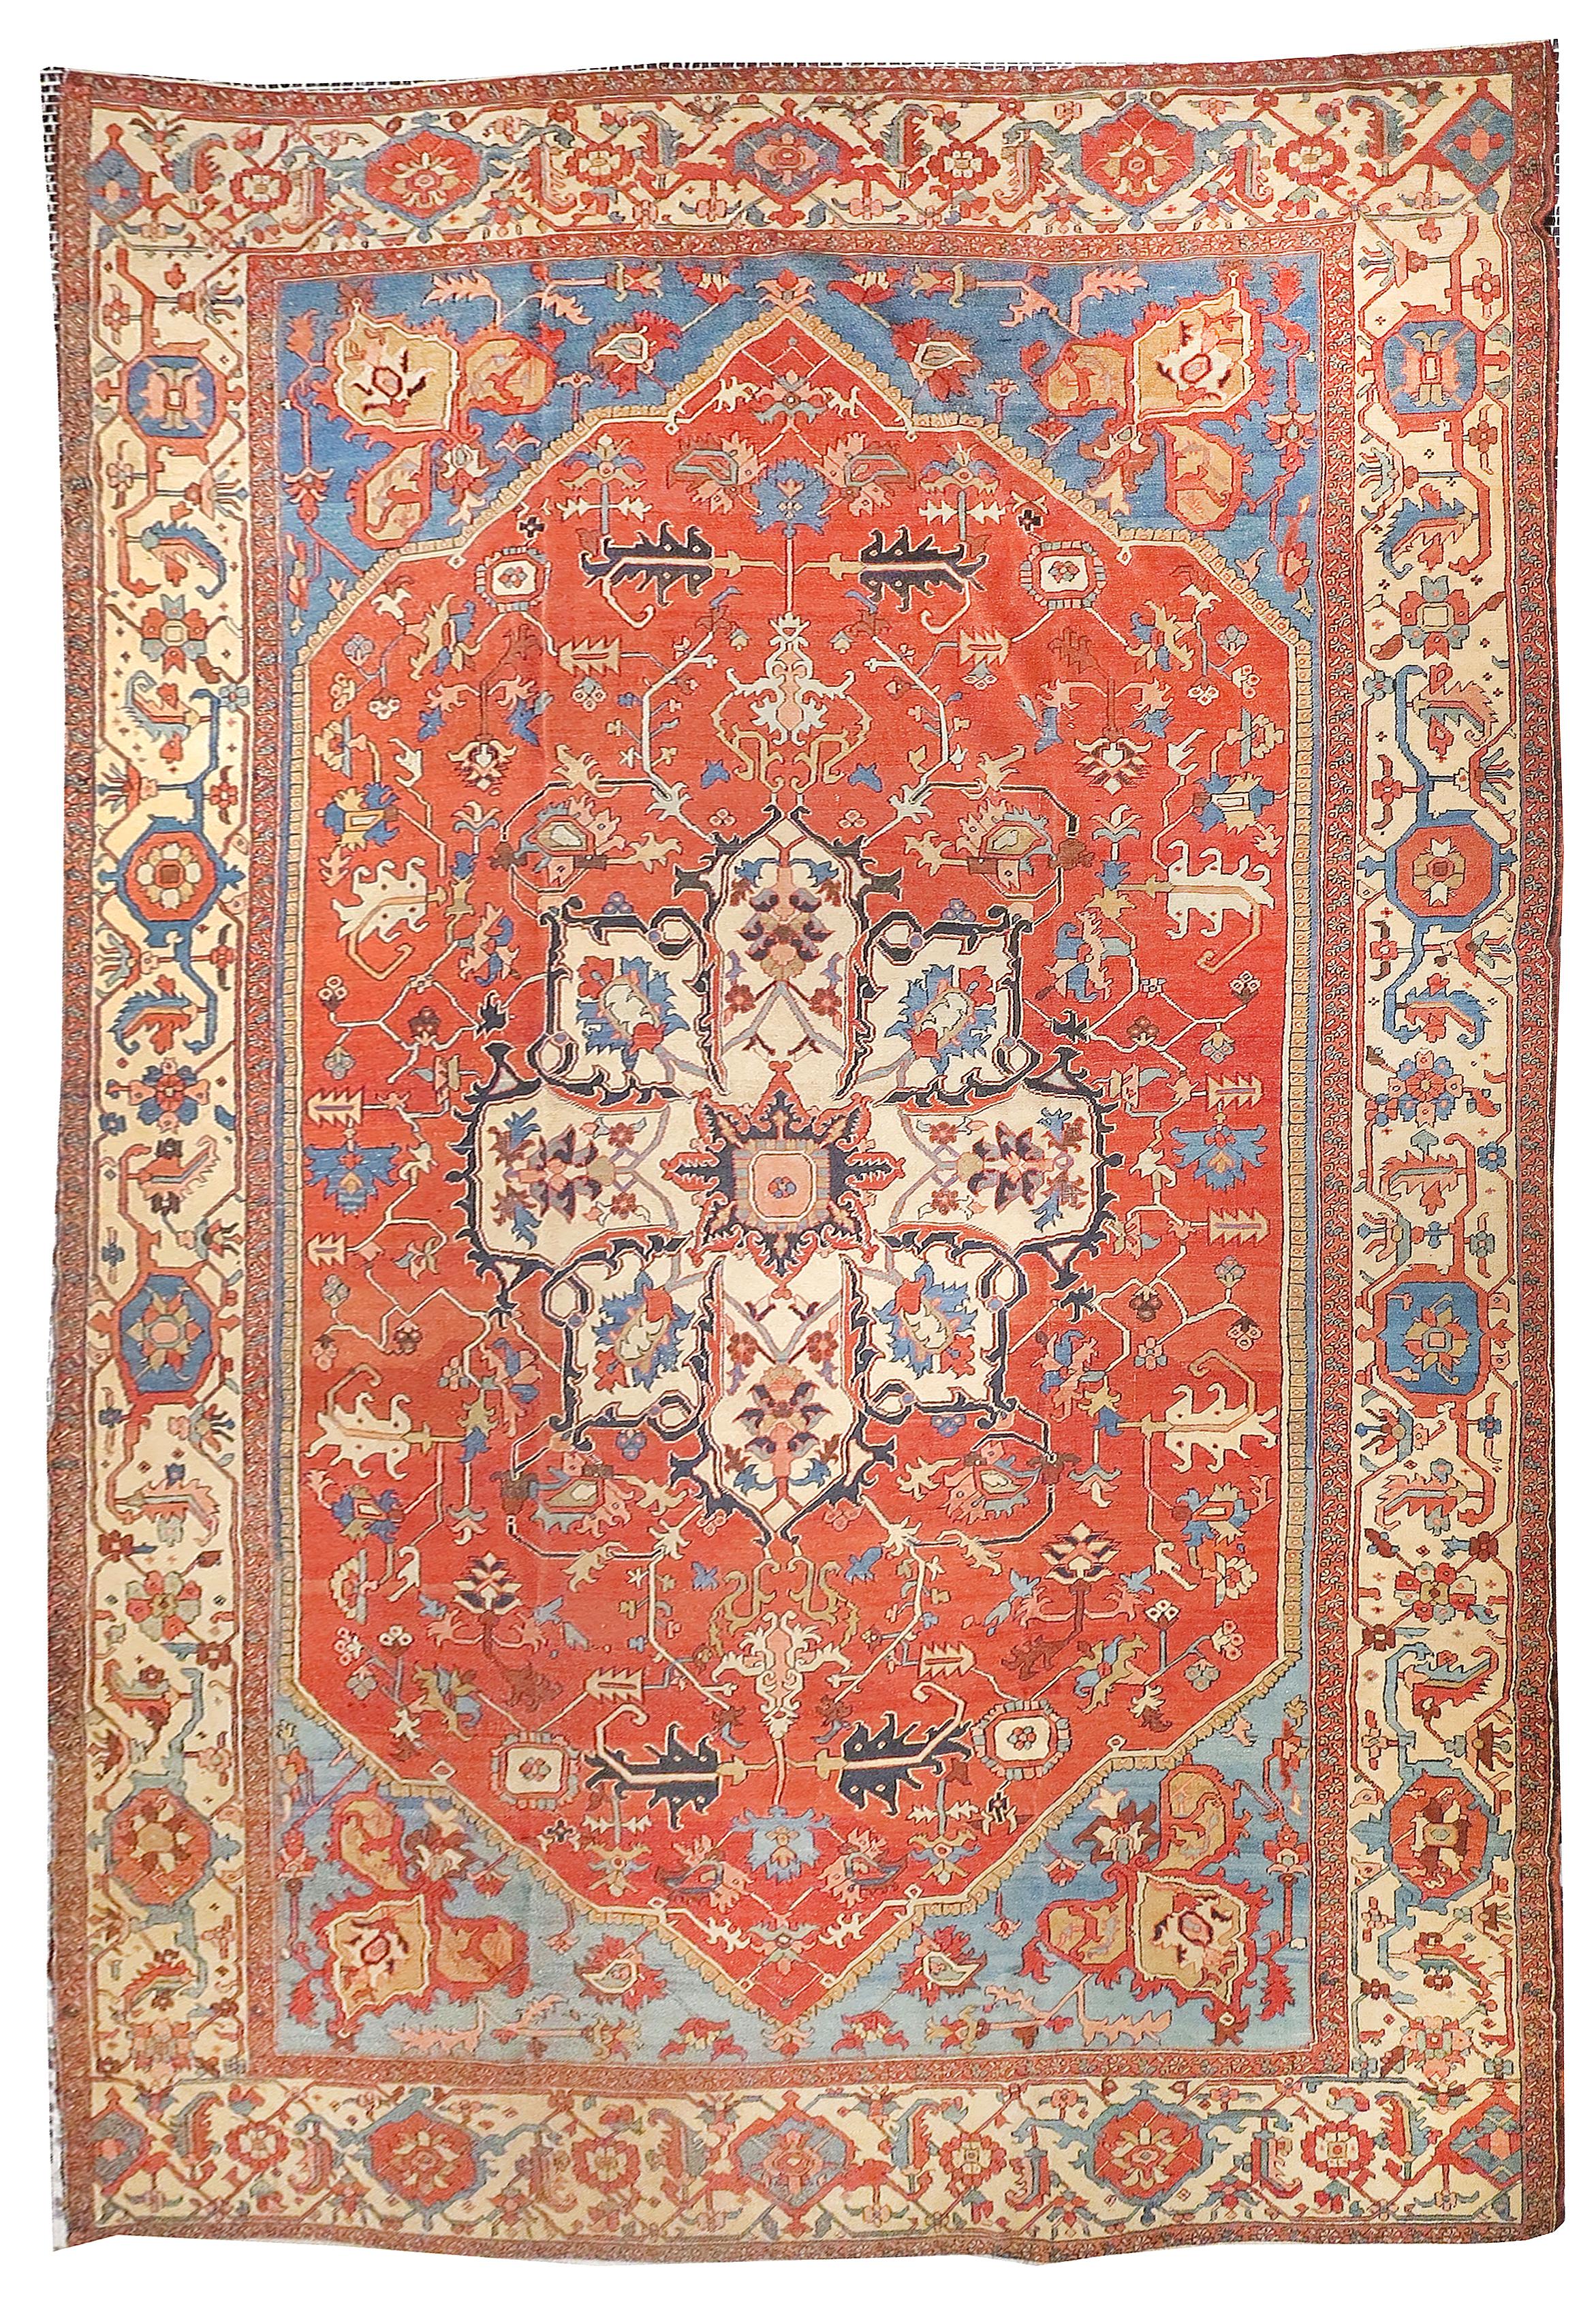 Hand-Knotted Extremly Fine Antique Persian Bakshayesh Rug, Hand Knotted, circa 1890